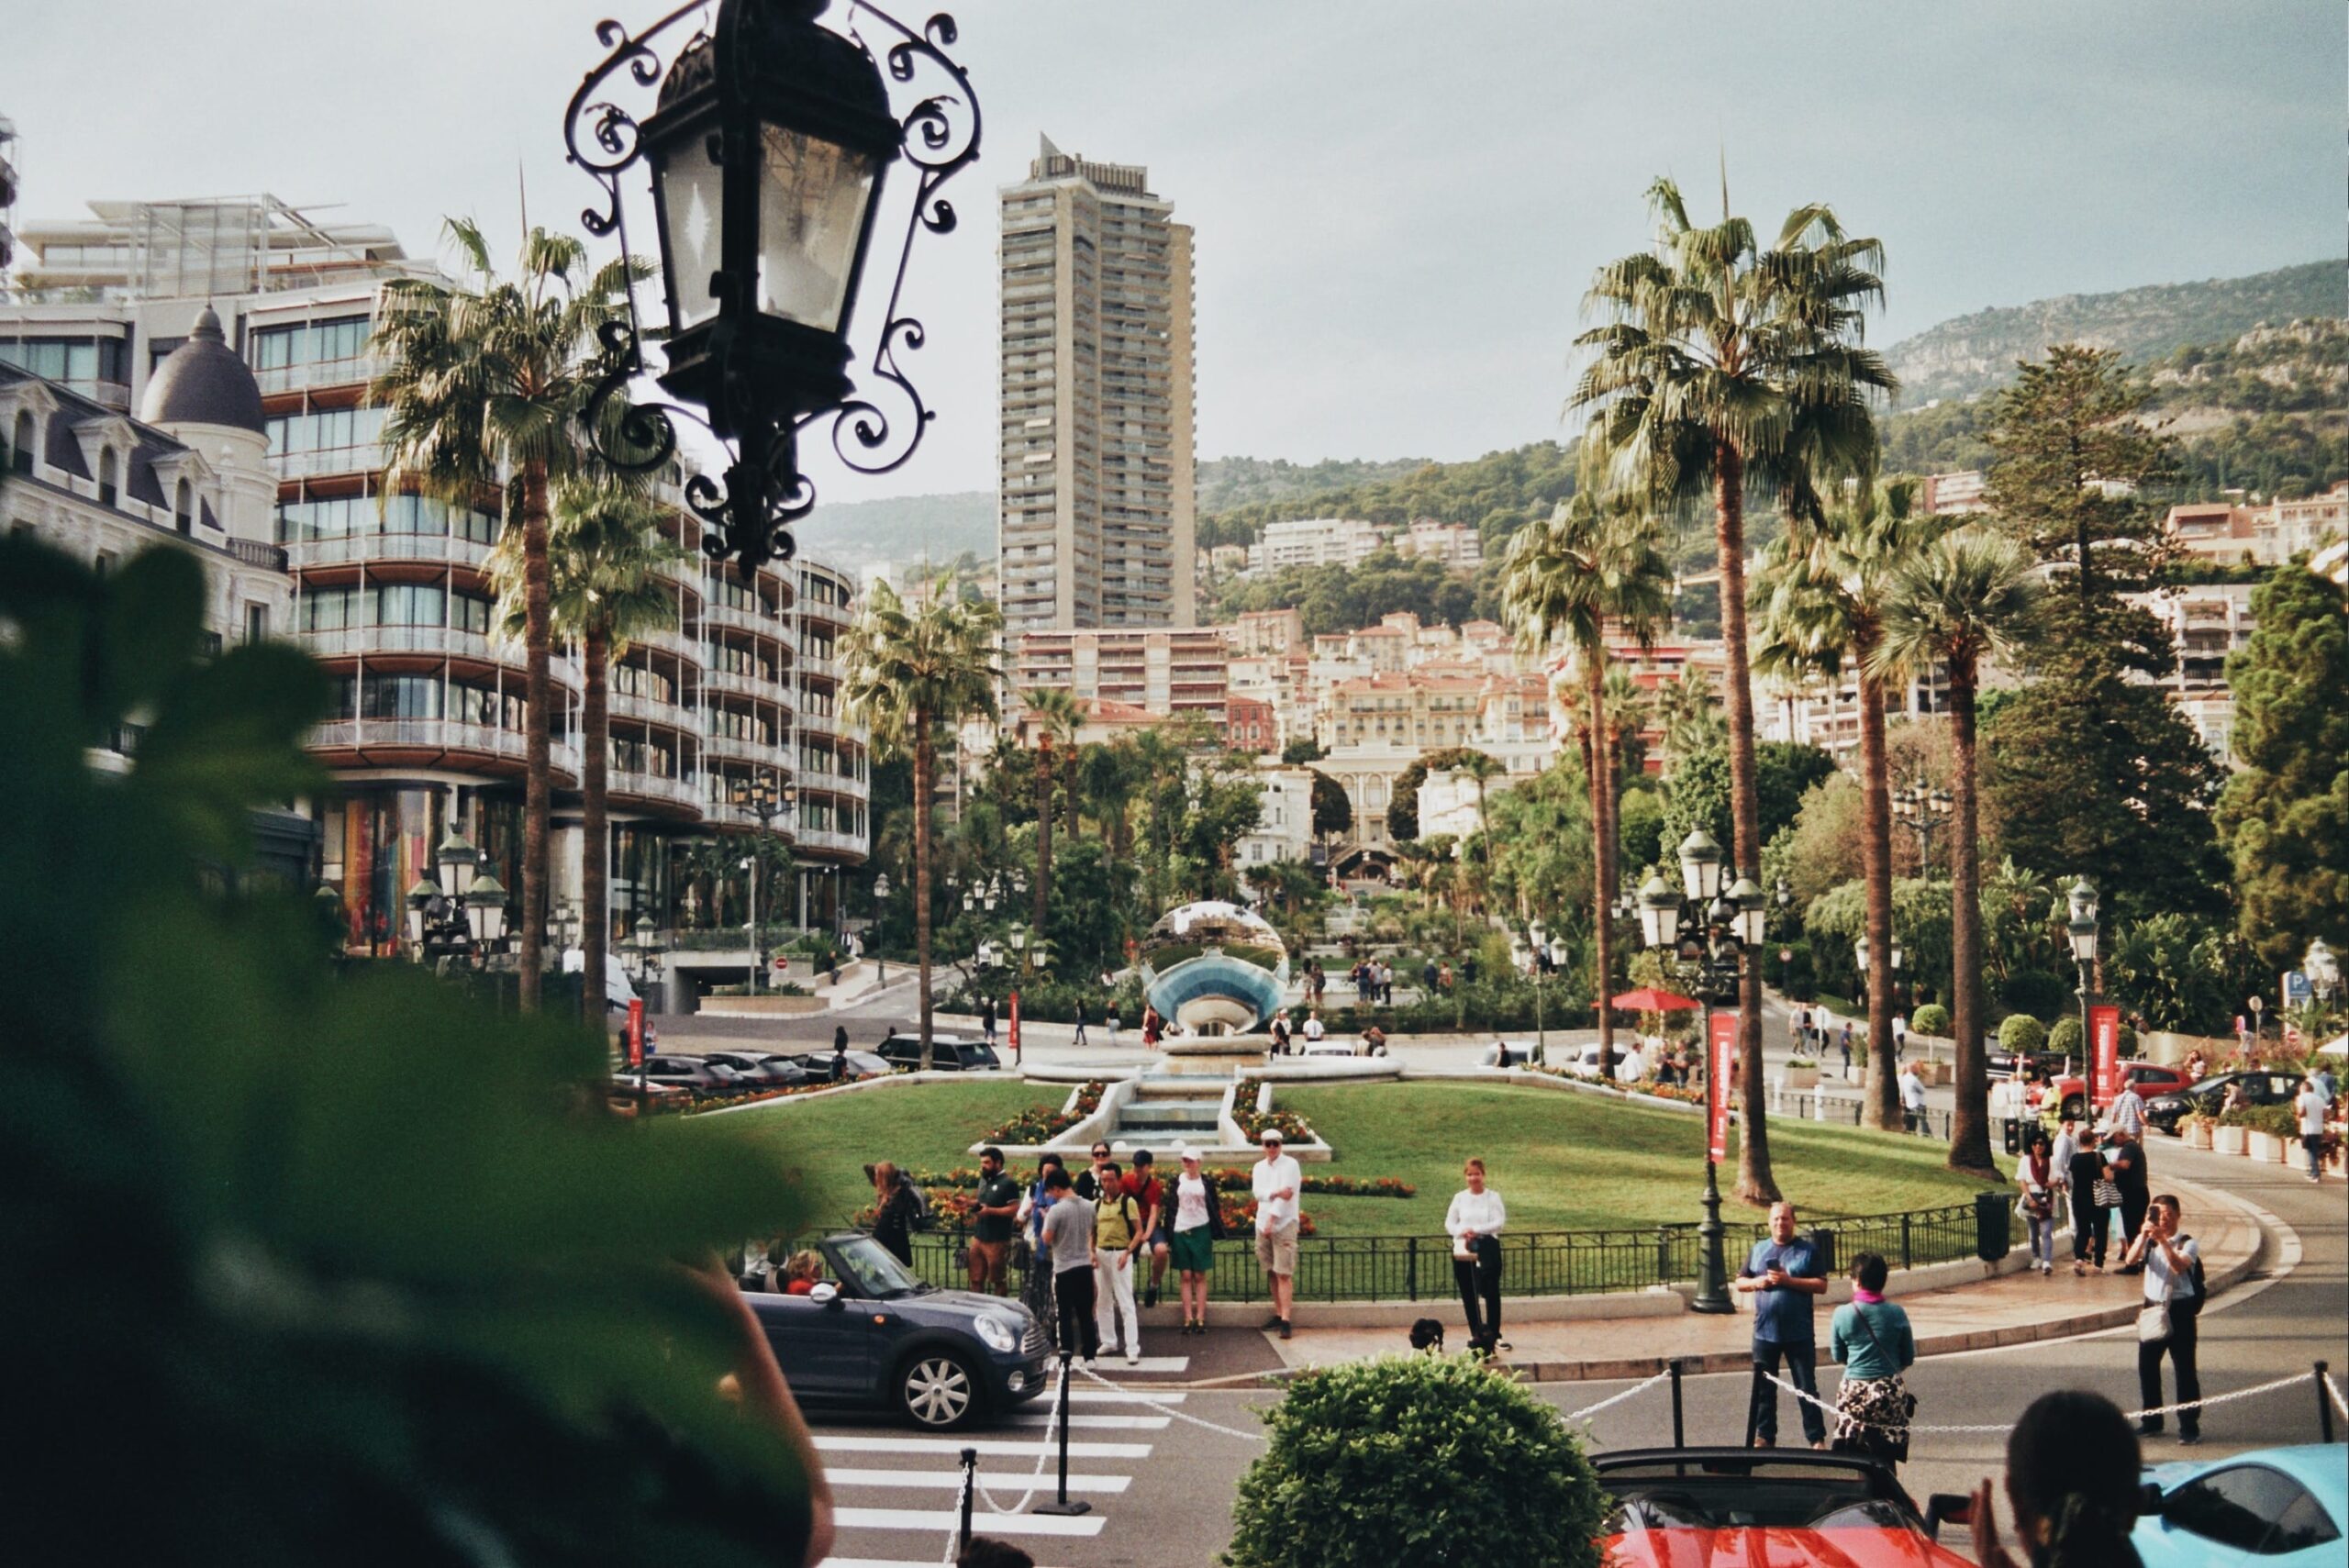 Views from the door of the famous Monaco Casino